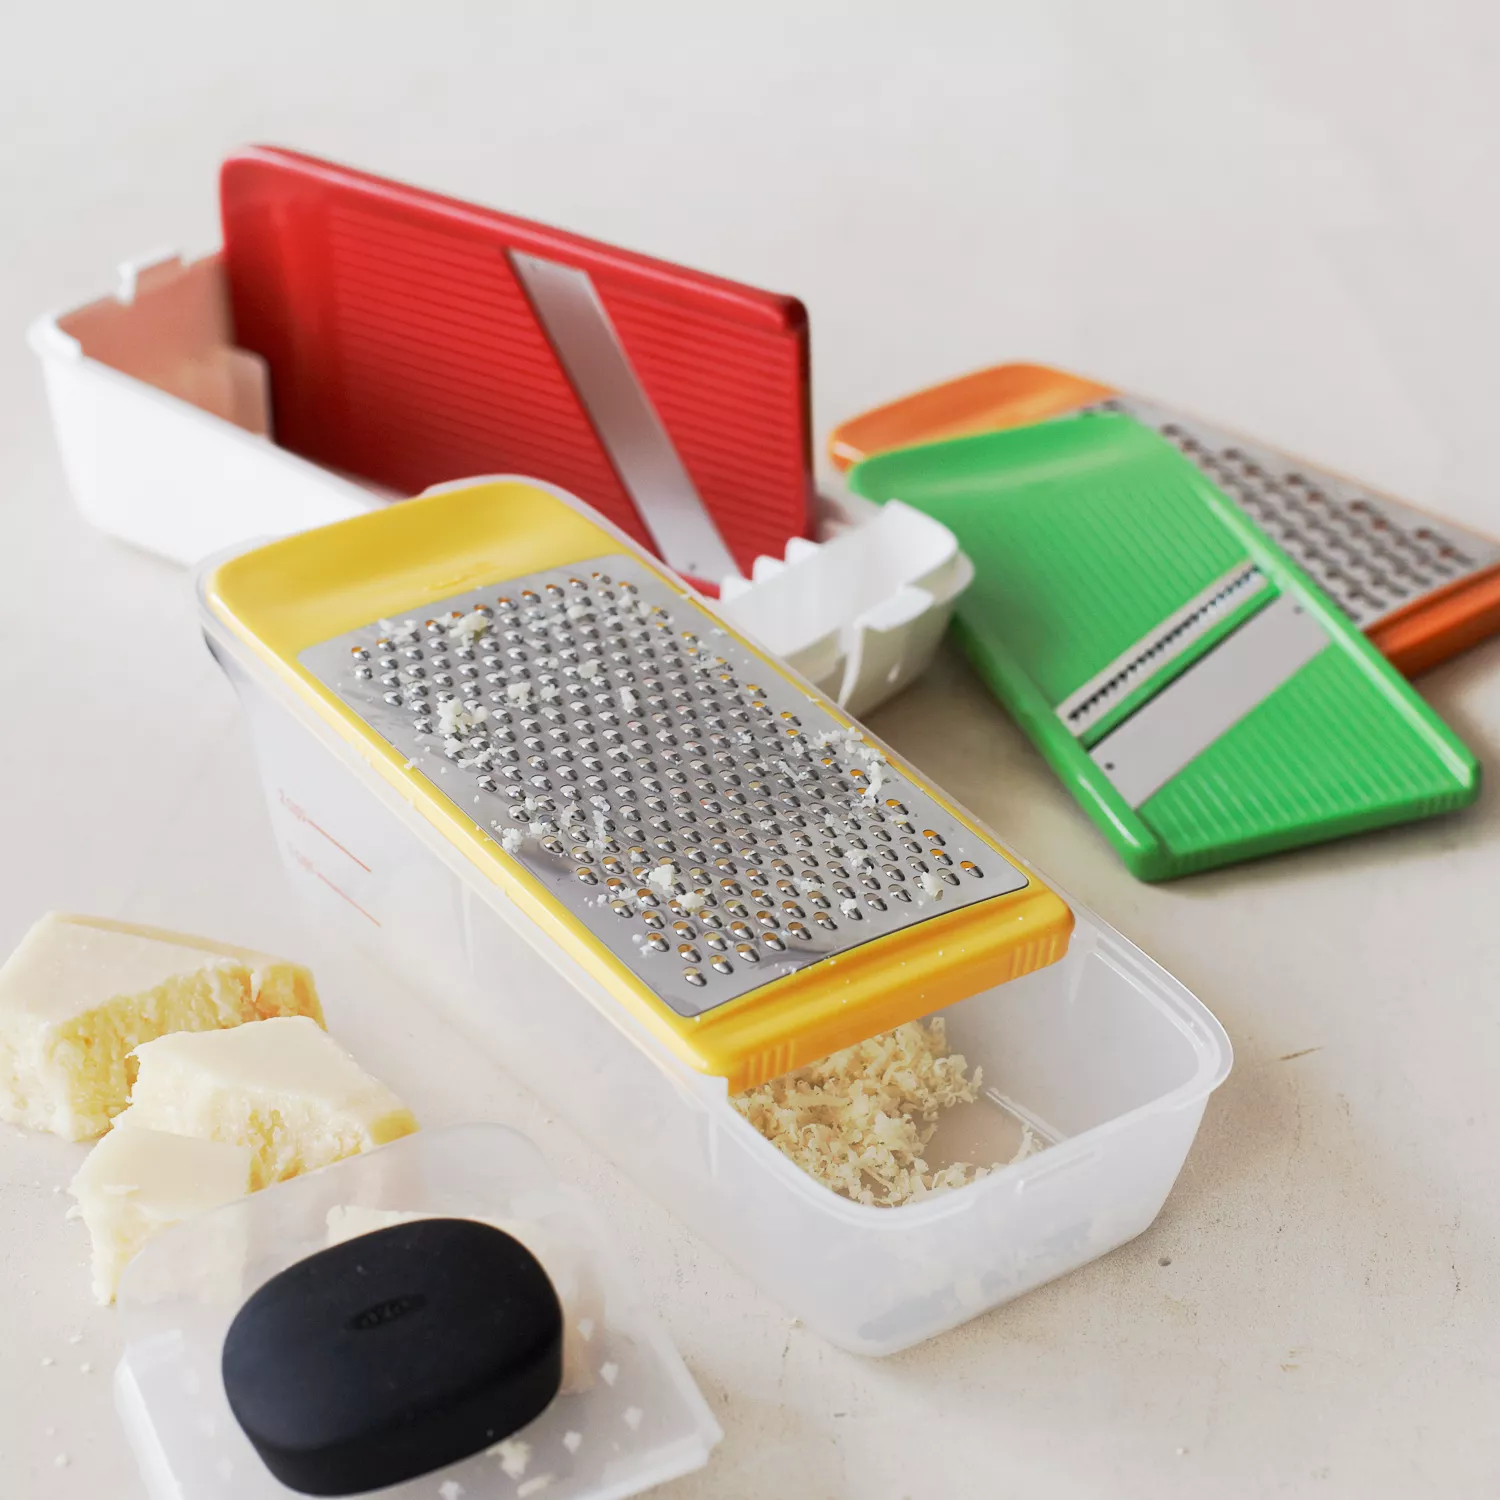 Oxo Complete Grate And Slice Set : Target